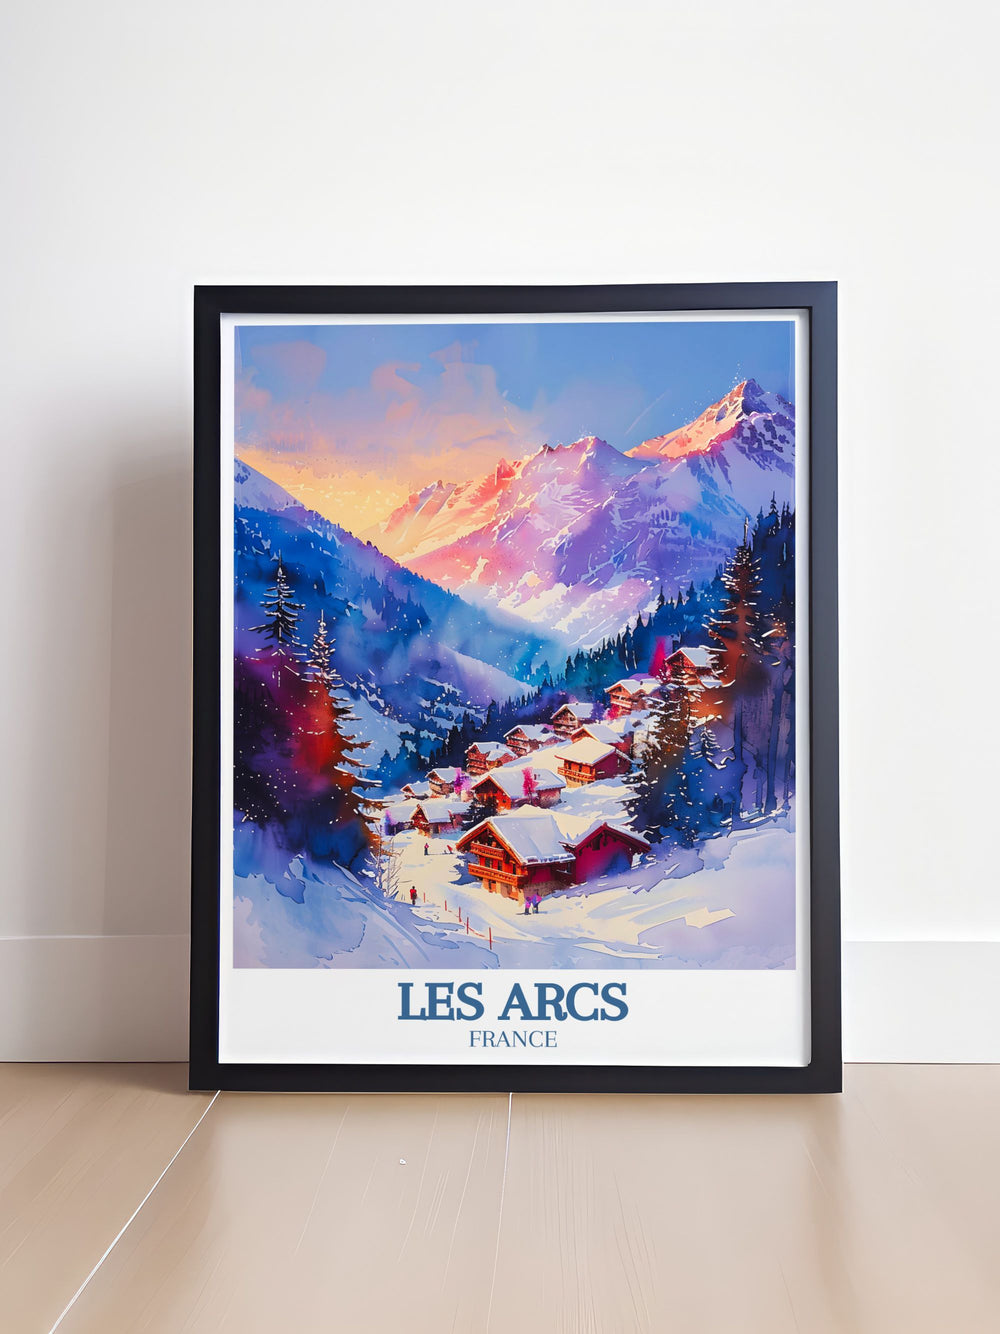 Les Arcs print with Aiguille Rouge Mont Blanc perfect wall decor for any room showcasing the stunning landscapes of the French Alps and the excitement of skiing and travel prints